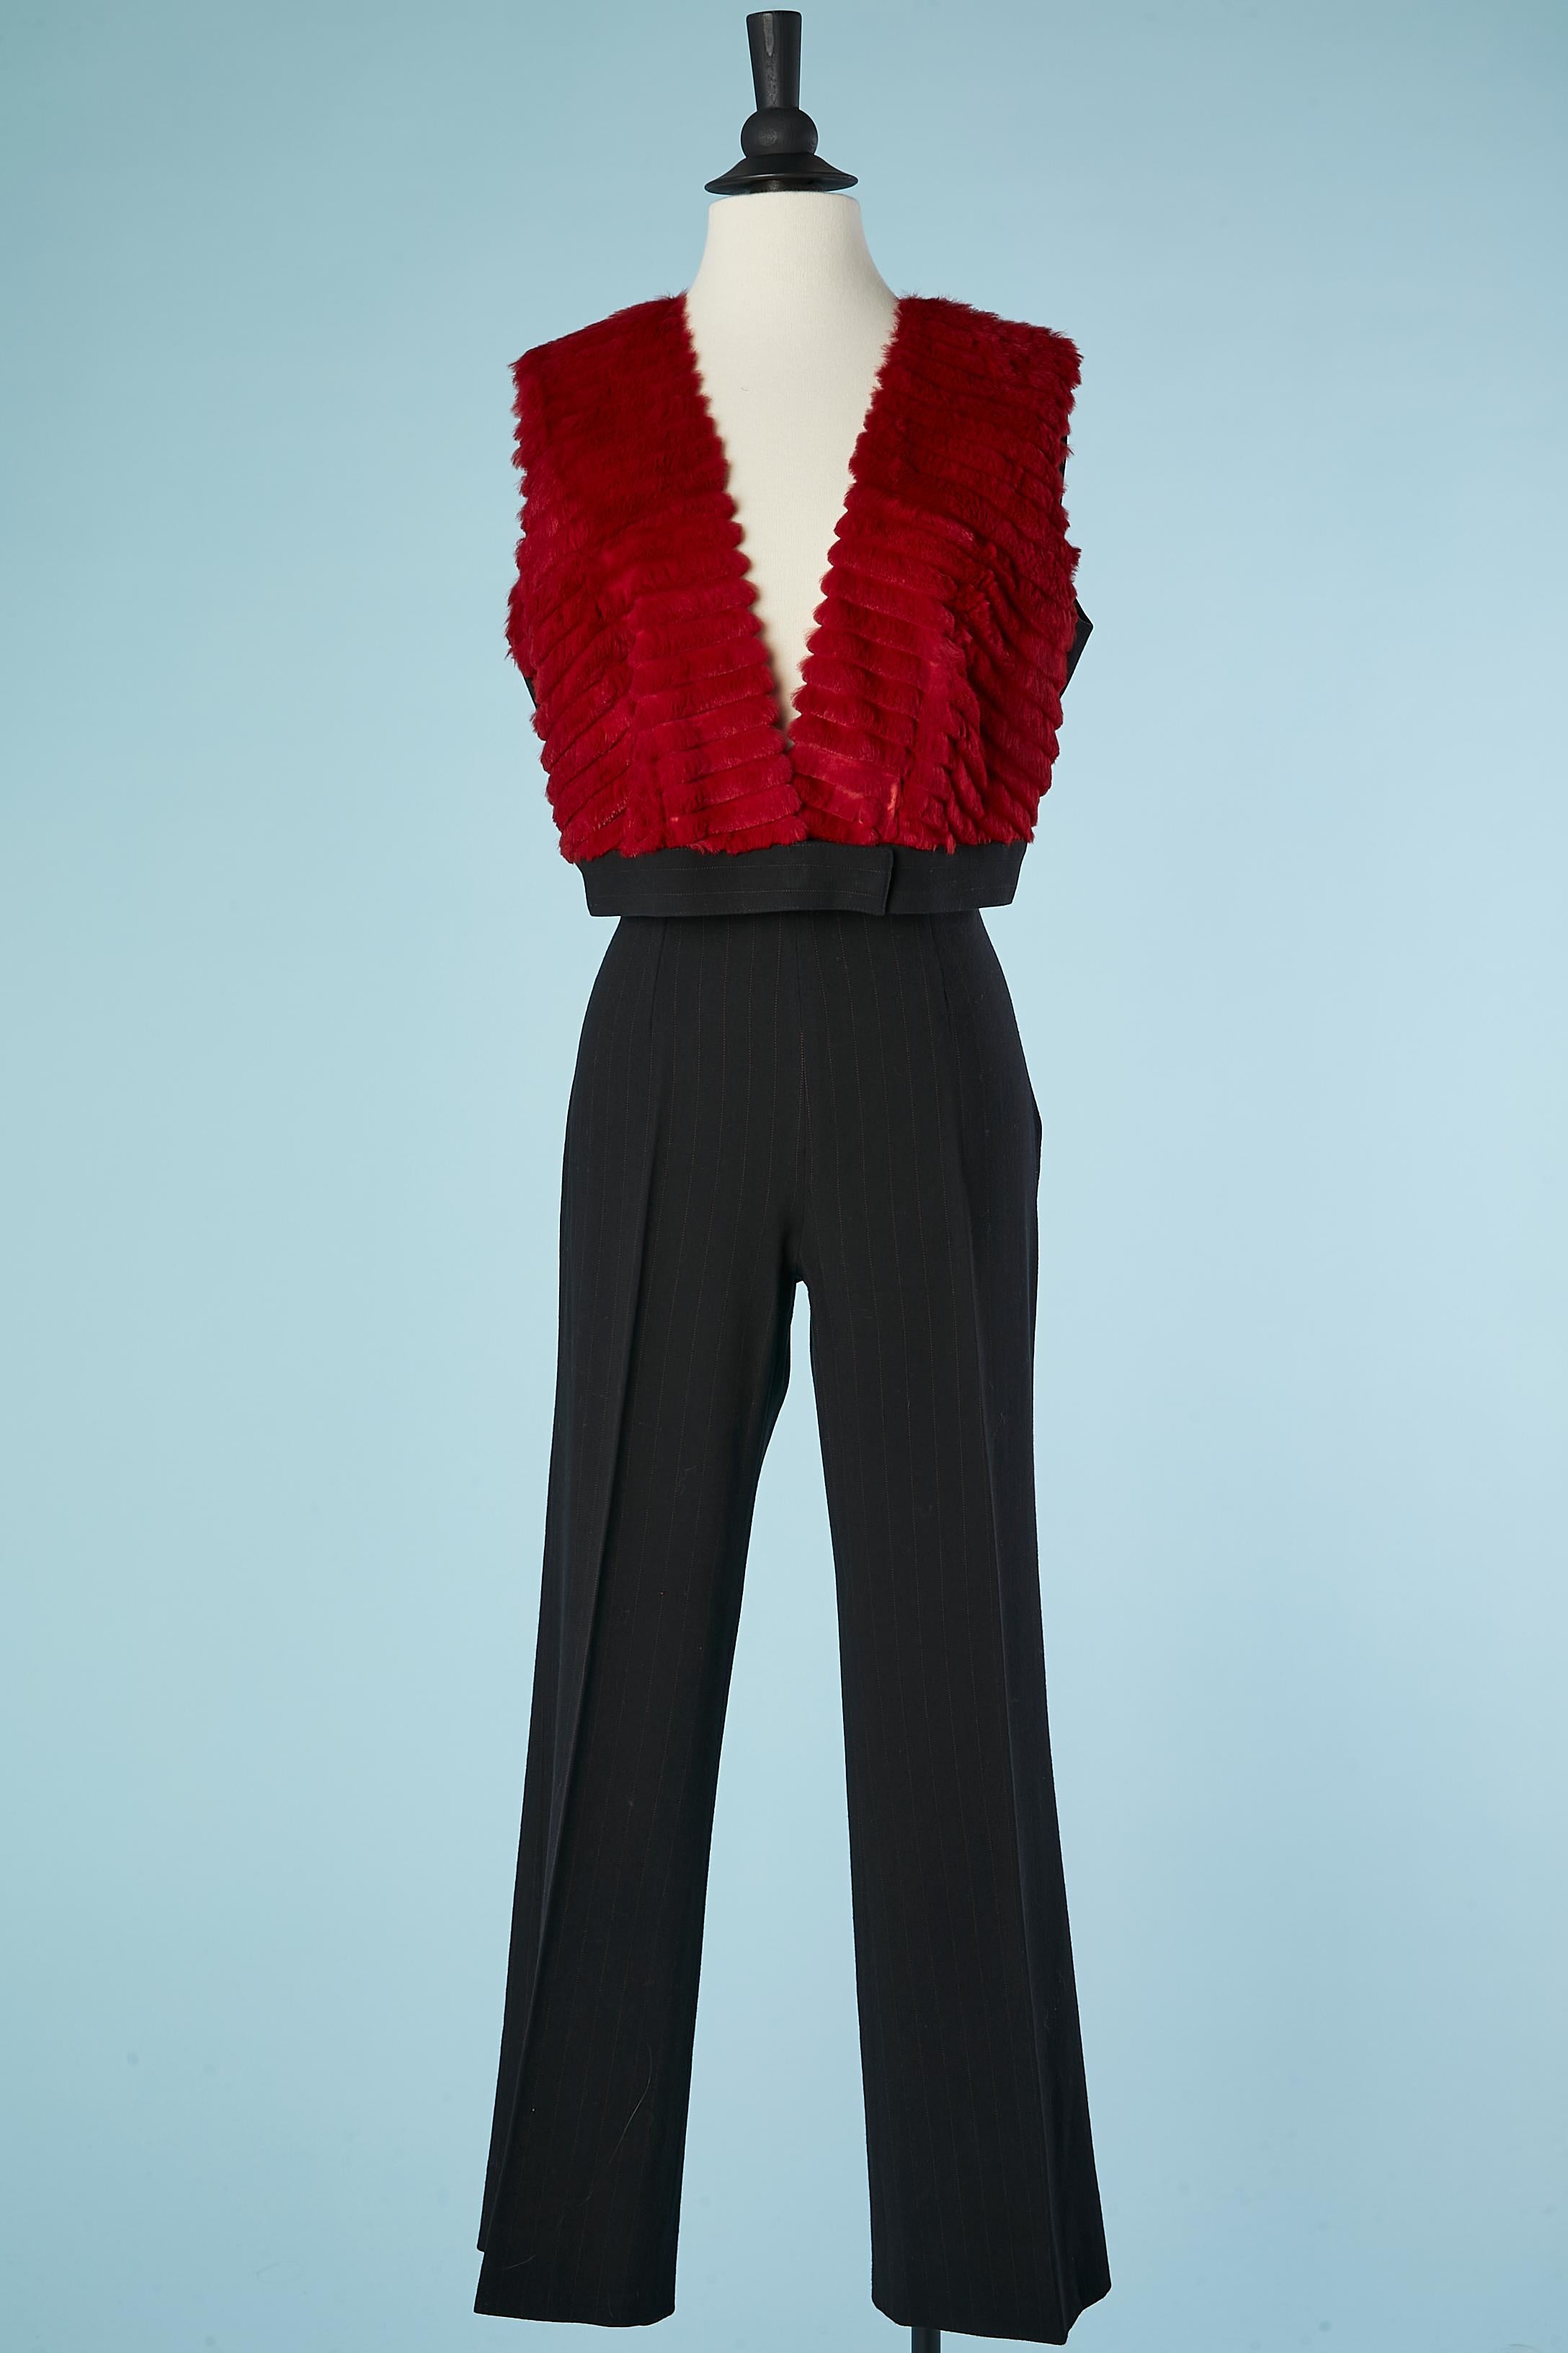 Black wool and red pin-stripe trouser-suit and fur vest Gianfranco Ferré Studio For Sale 3